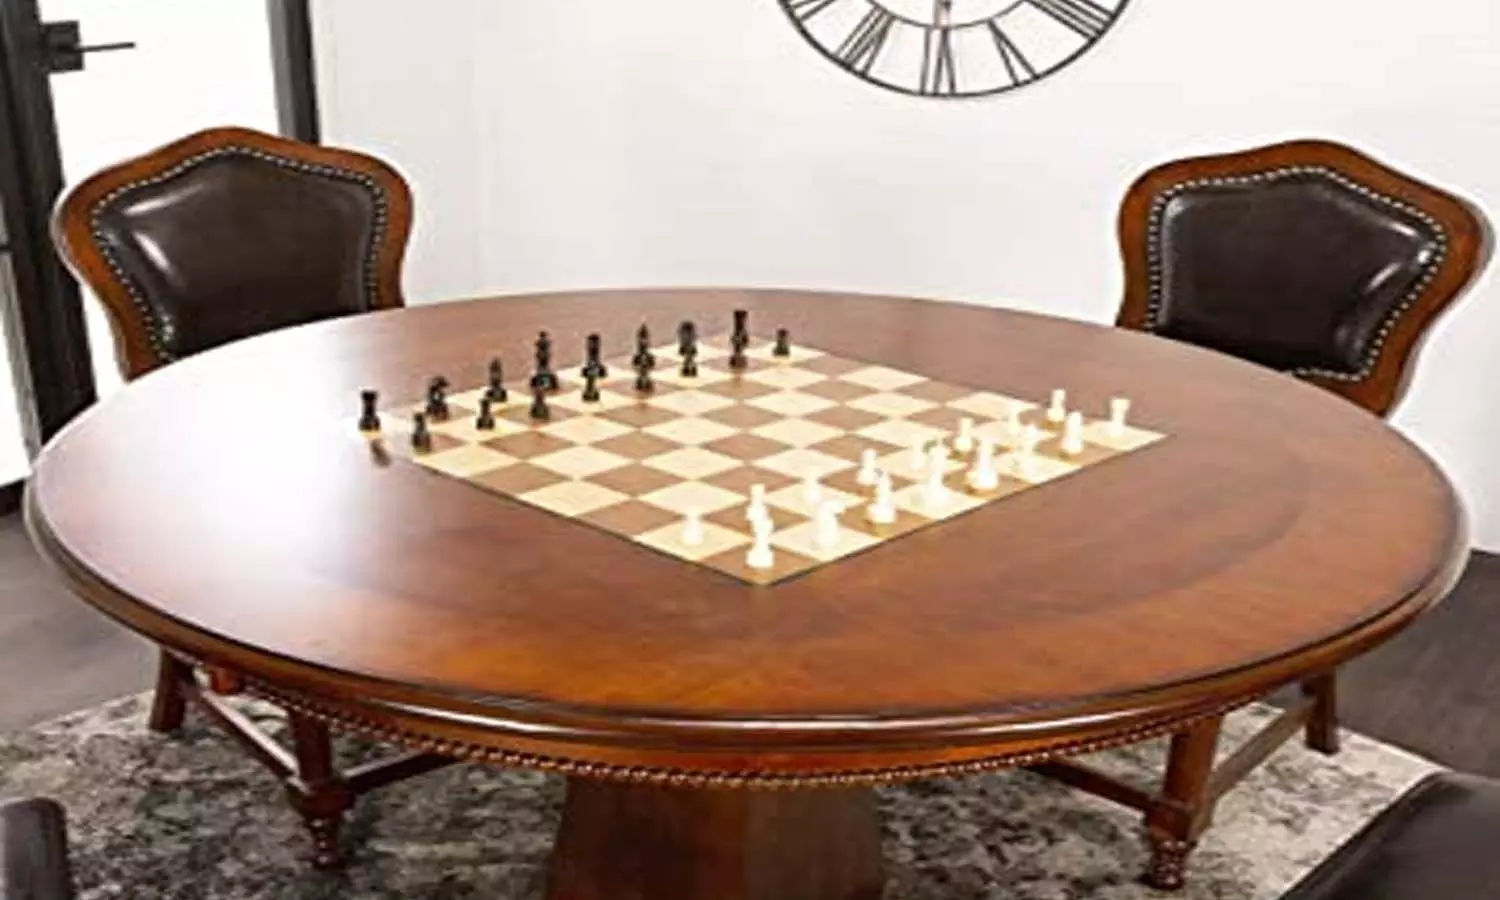 Chair is also very important in the game of chess, know what is the role of chairs